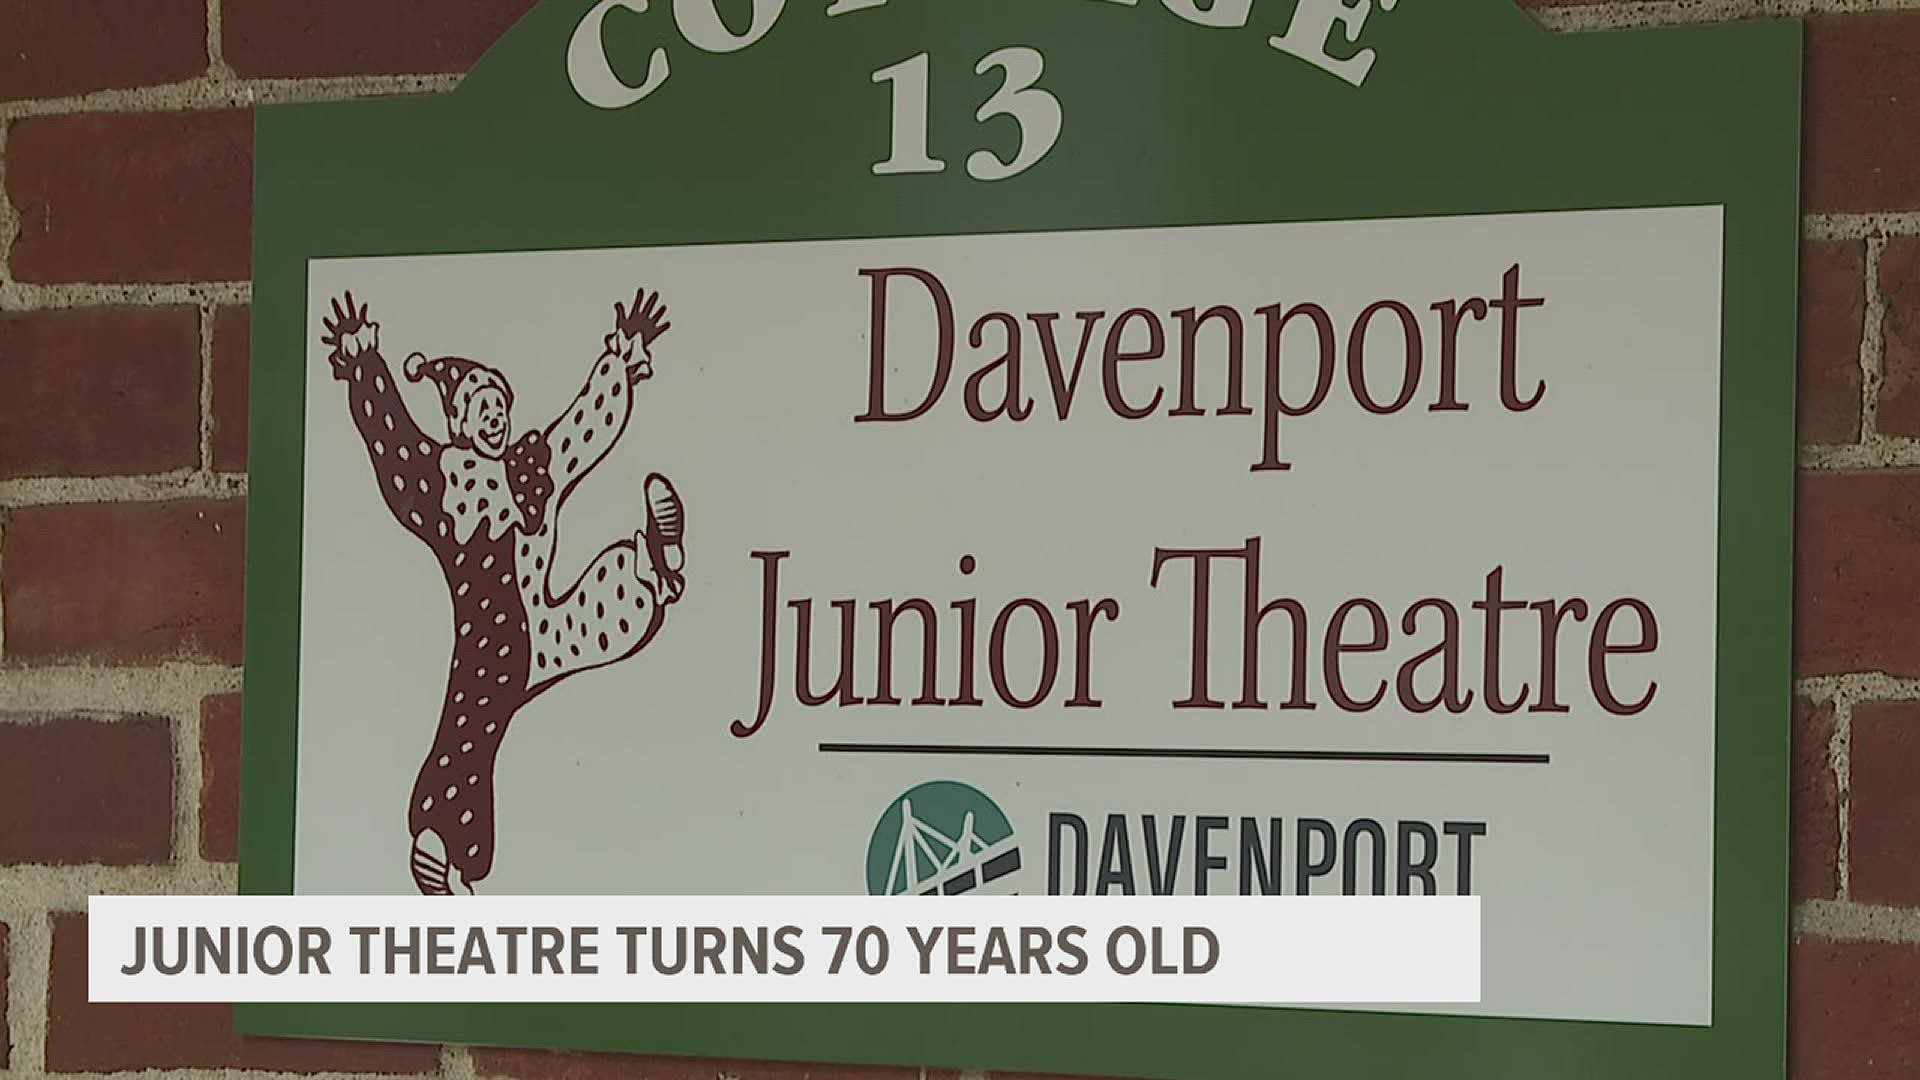 The Davenport theatre, founded in 1951, celebrated its 70-year anniversary on June 25 with a picnic and the opening of its new museum.